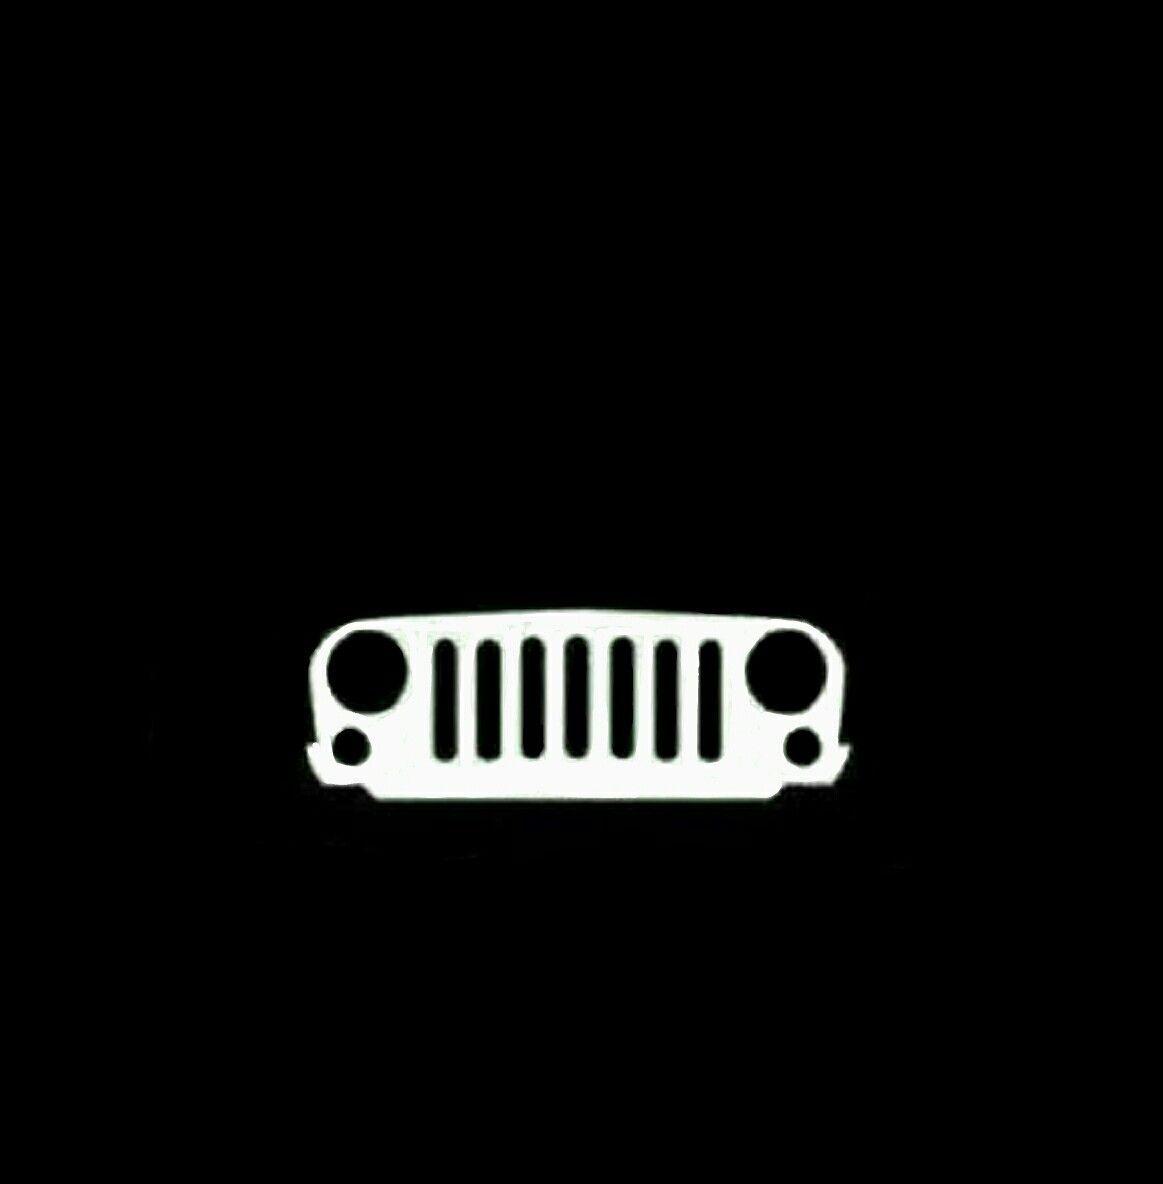 Jeep Grill Wallpapers - Top Free Jeep Grill Backgrounds - WallpaperAccess